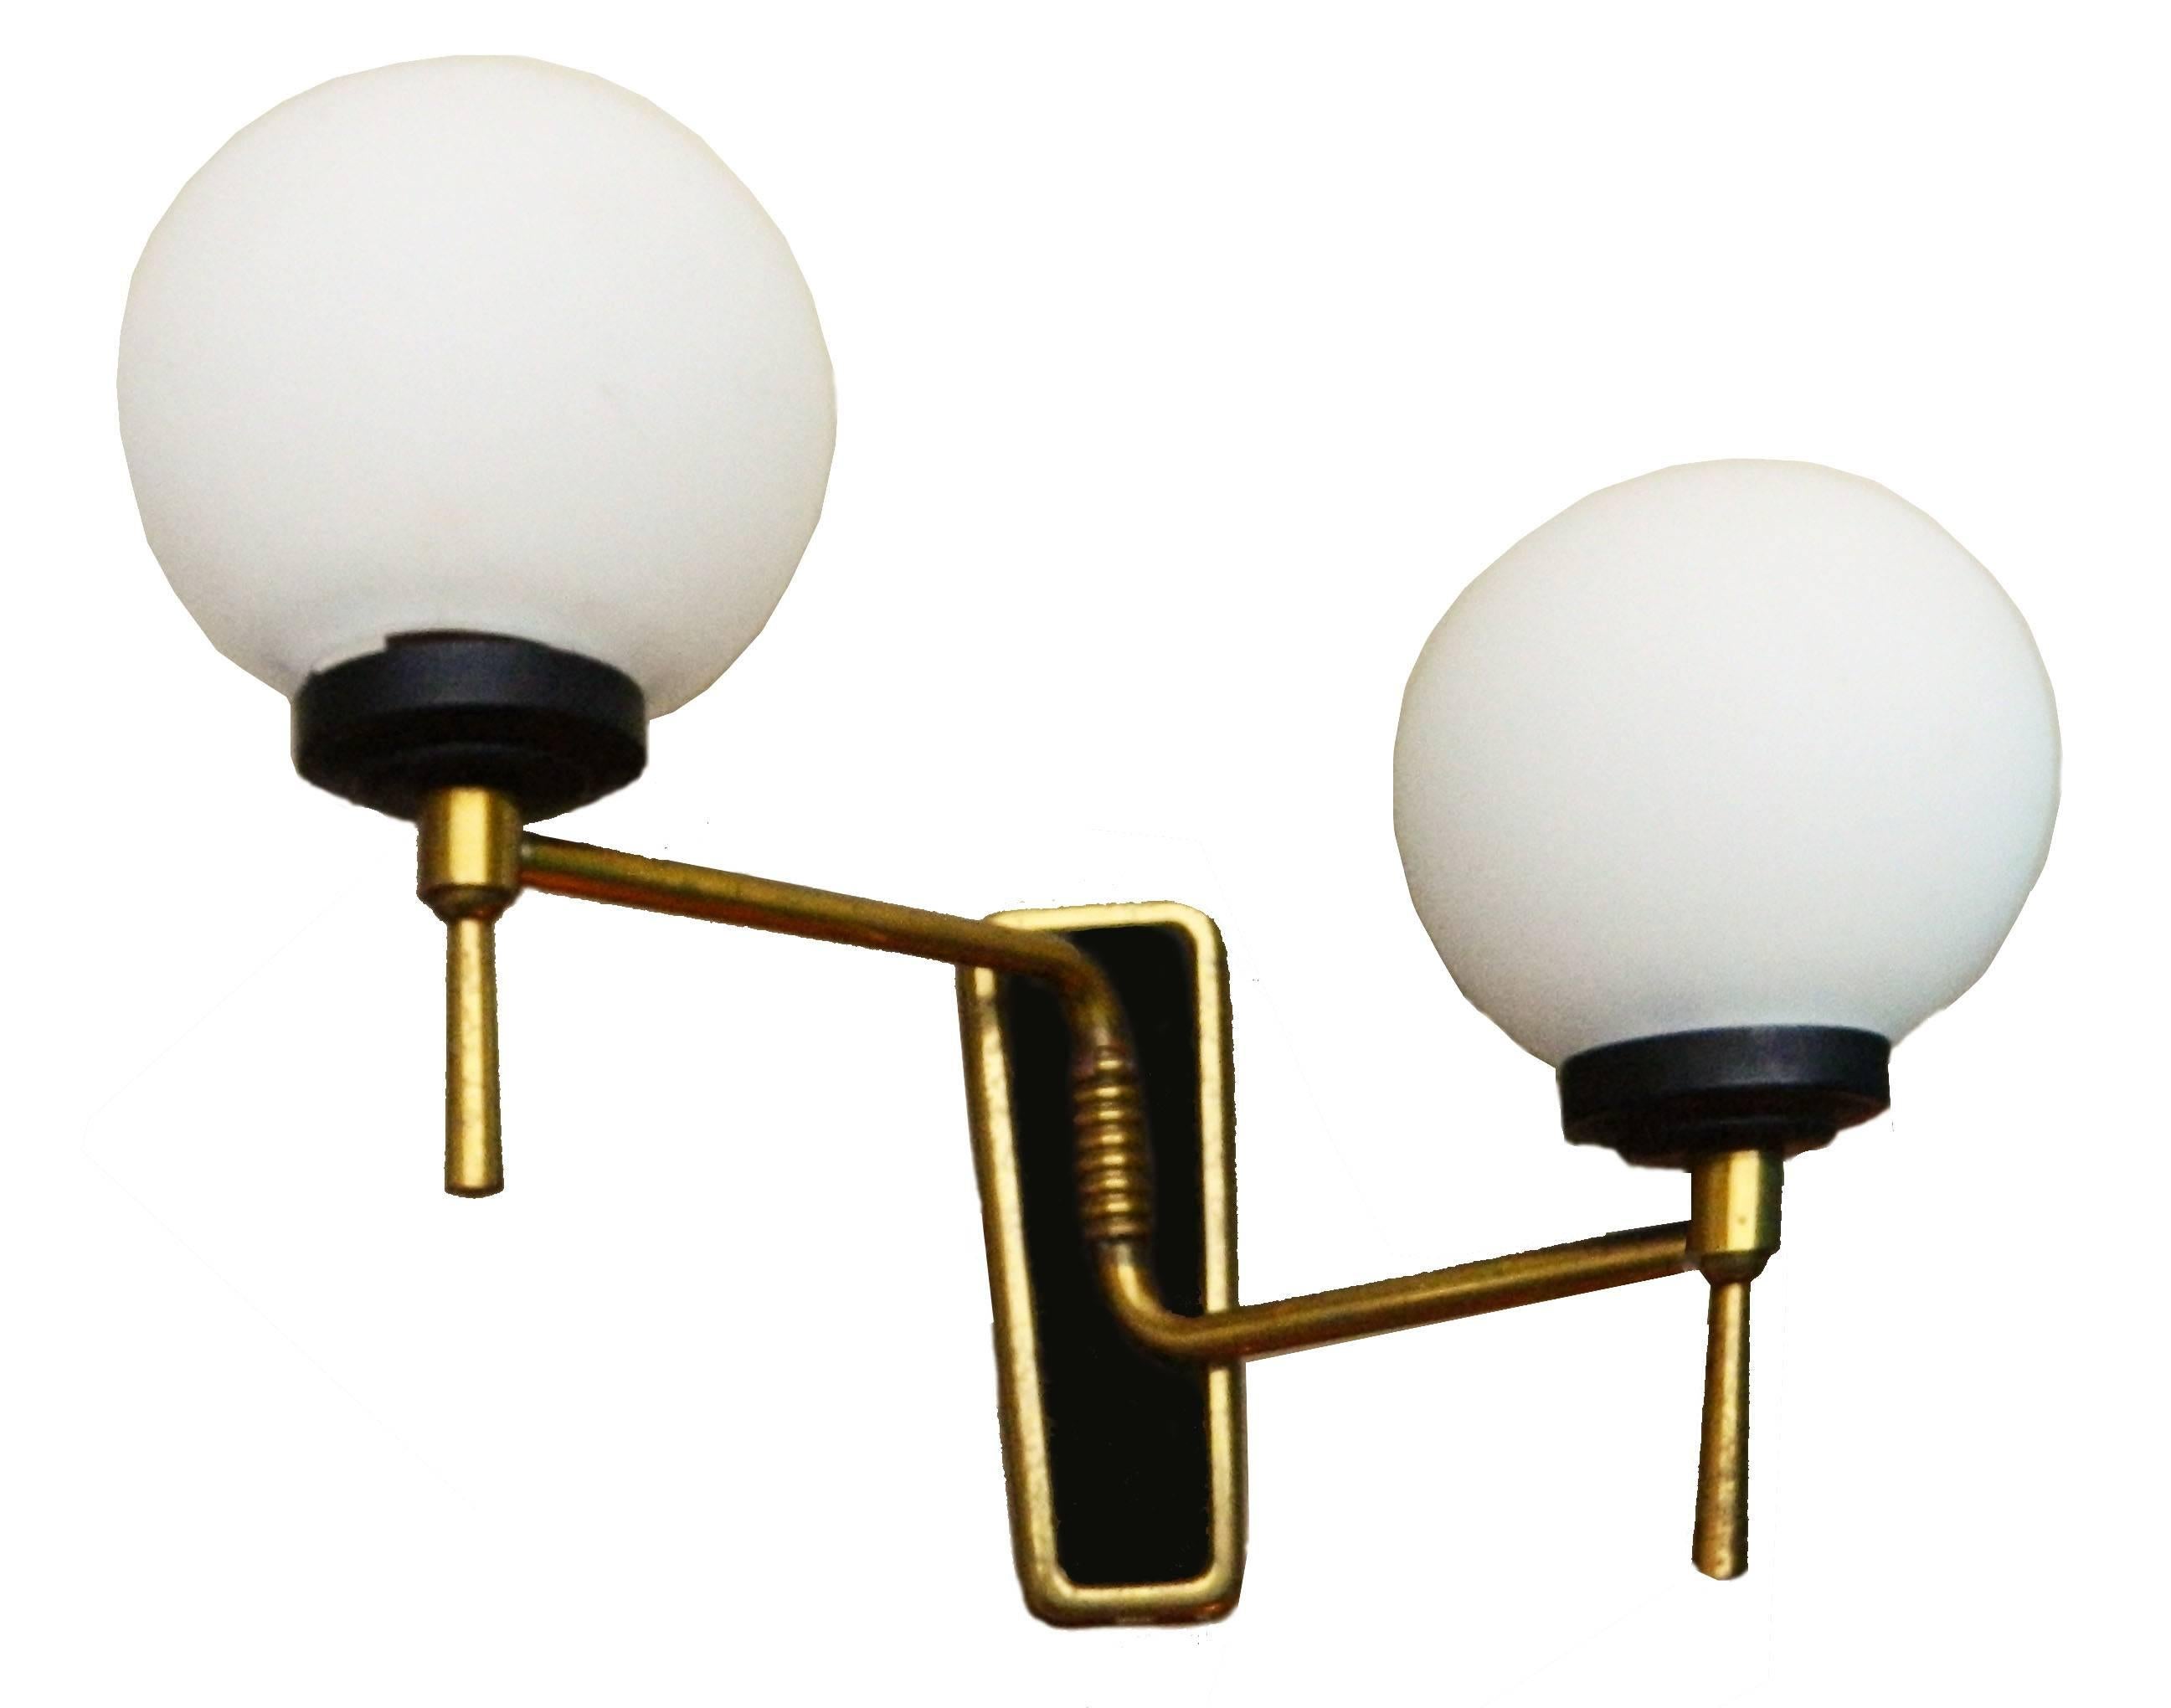 A pair of 1960s Maison Lunel pair of sconces, two lights per sconce.
US rewired and in working condition.
45 watts max per bulb.
Custom backplates available, ask for a quote.
Have a look on our impressive collection of French and Italian Mid